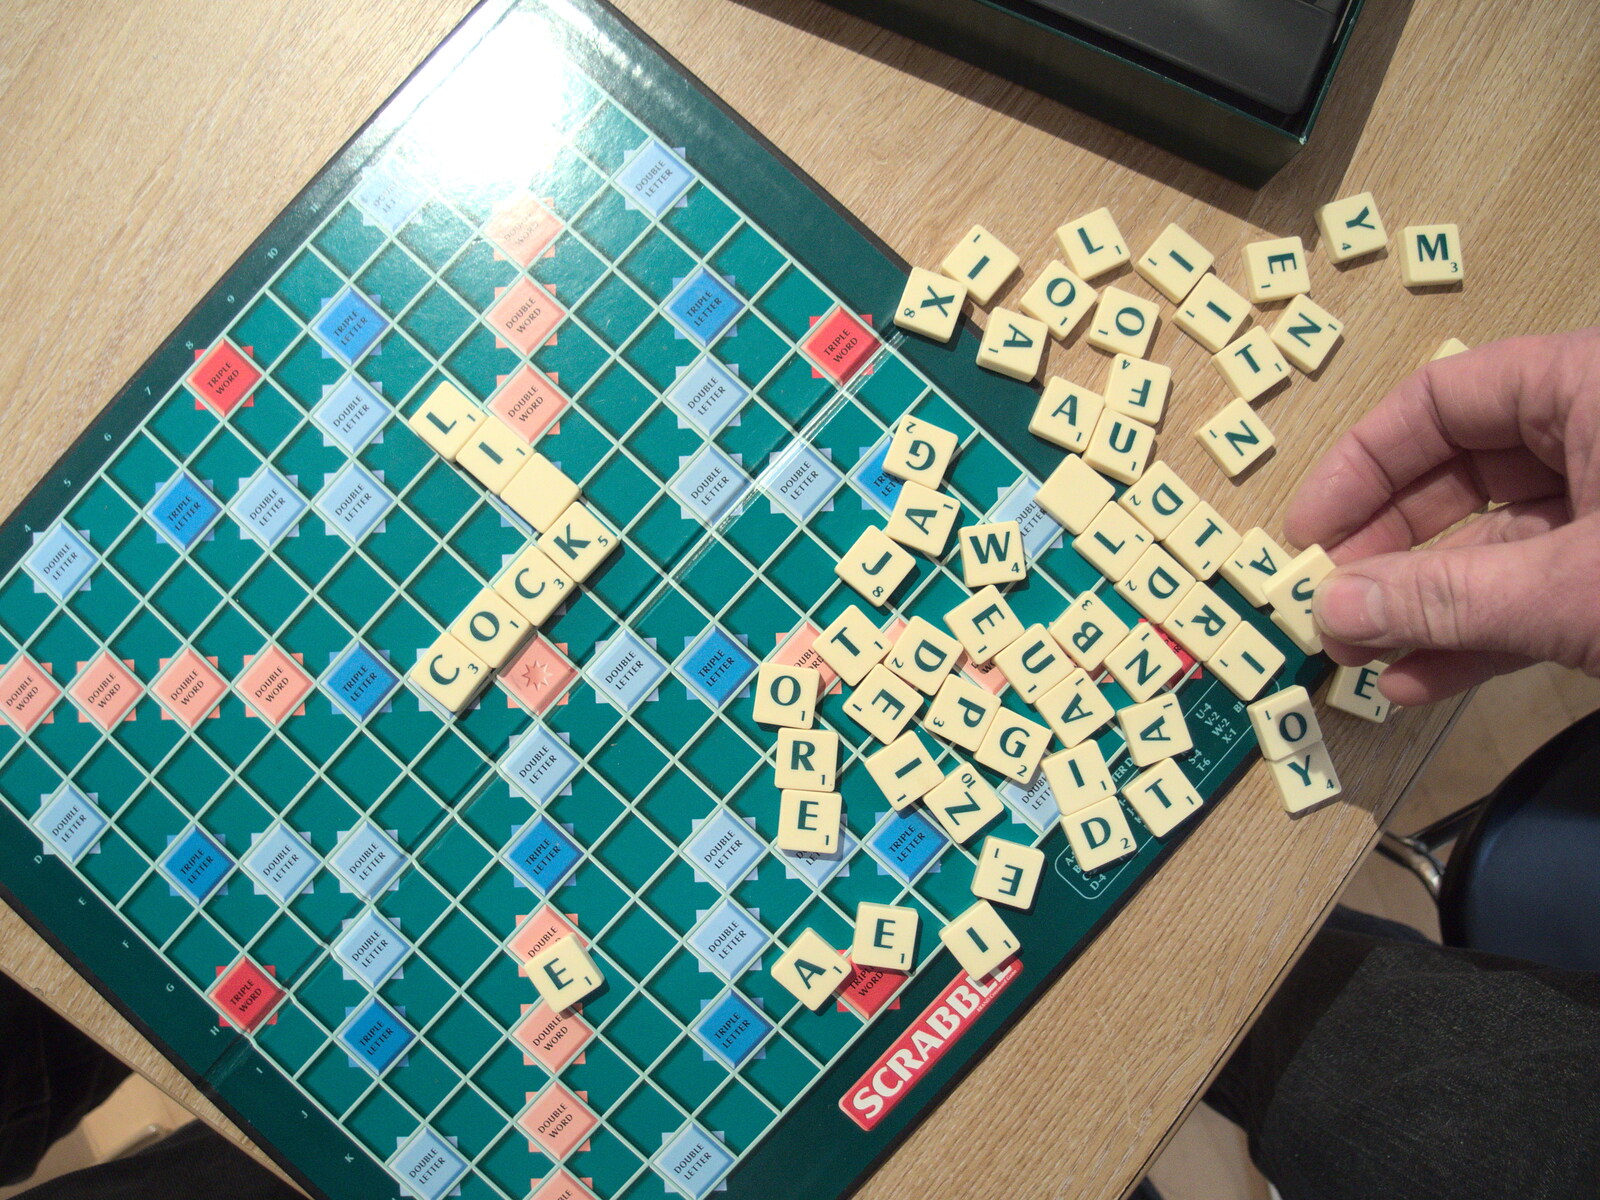 The tiles are all spread out from The BBs Play Scrabble at Wingfield Barns, Wingfield, Suffolk - 24th May 2014